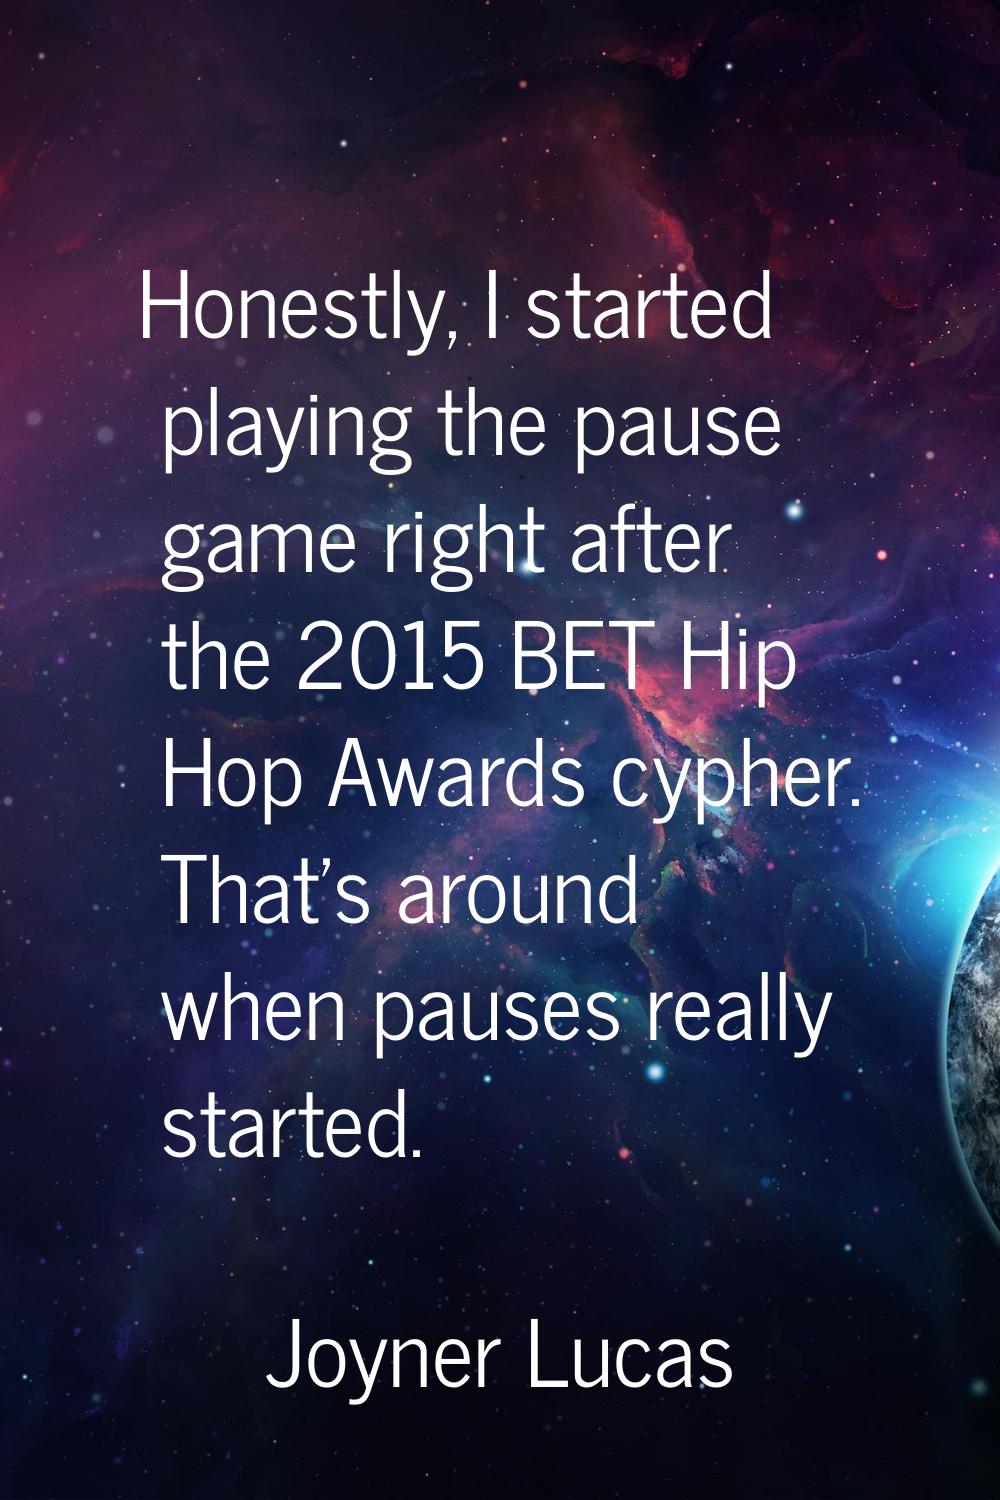 Honestly, I started playing the pause game right after the 2015 BET Hip Hop Awards cypher. That's a